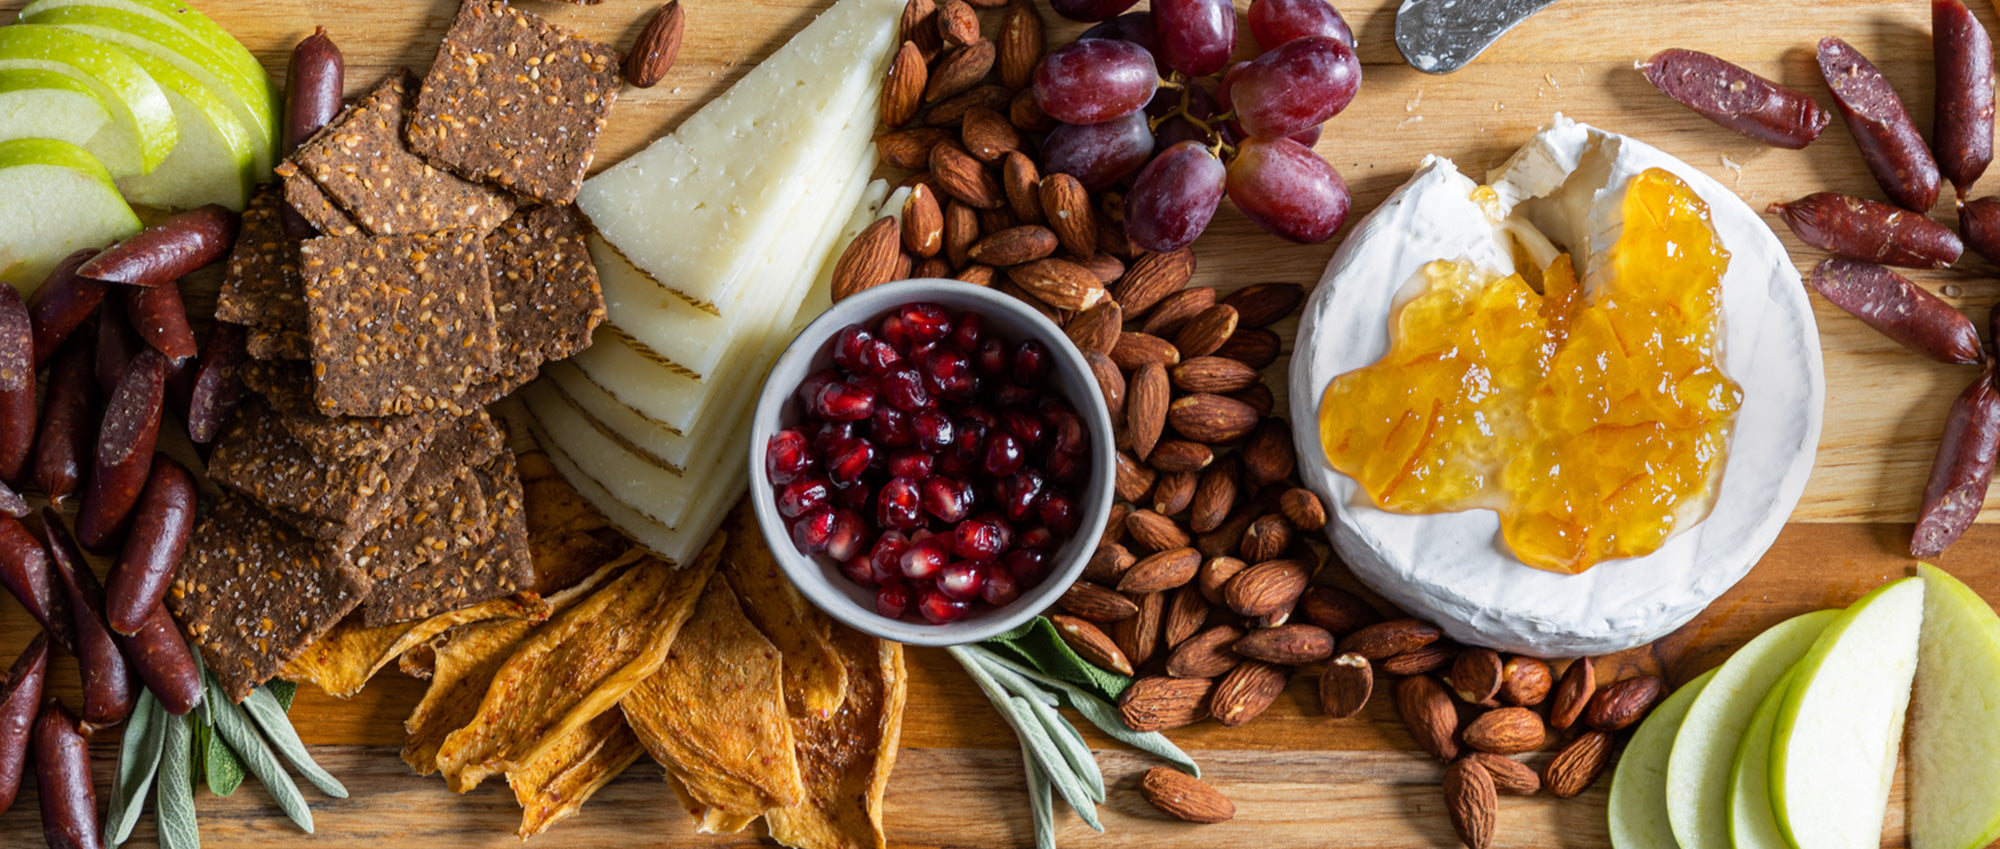 A wooden board covered with crudite for a celebration - Patagonia Provisions breadfruit crackers, sliced fruits, almonds, brie topped with preserves